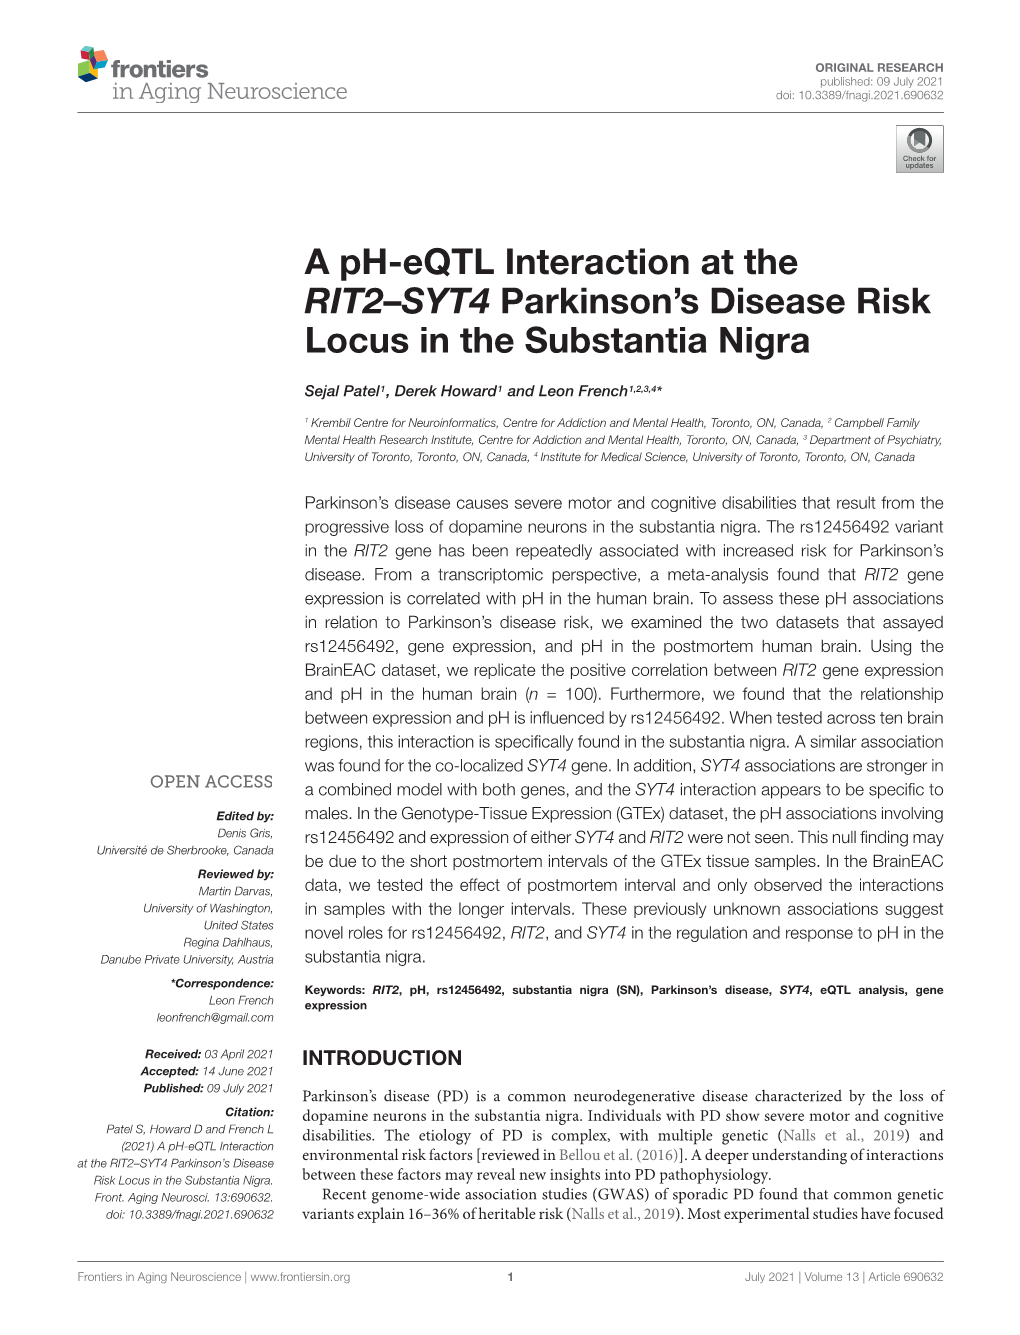 A Ph-Eqtl Interaction at the RIT2–SYT4 Parkinson's Disease Risk Locus in the Substantia Nigra